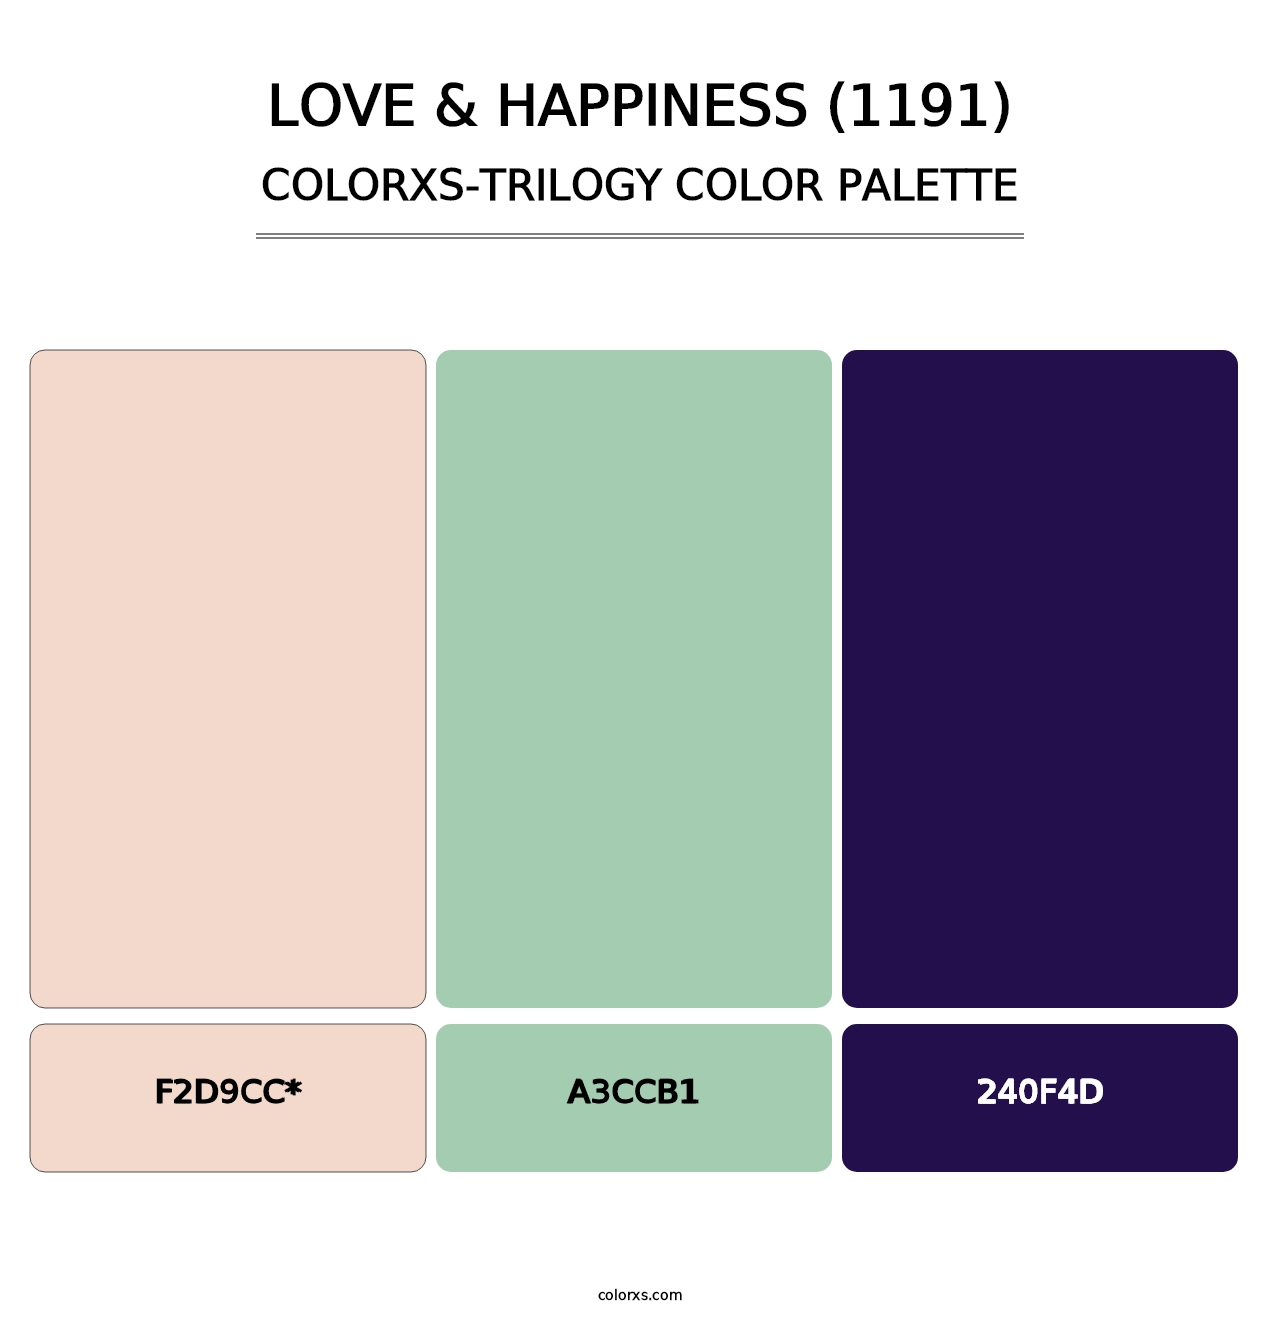 Love & Happiness (1191) - Colorxs Trilogy Palette